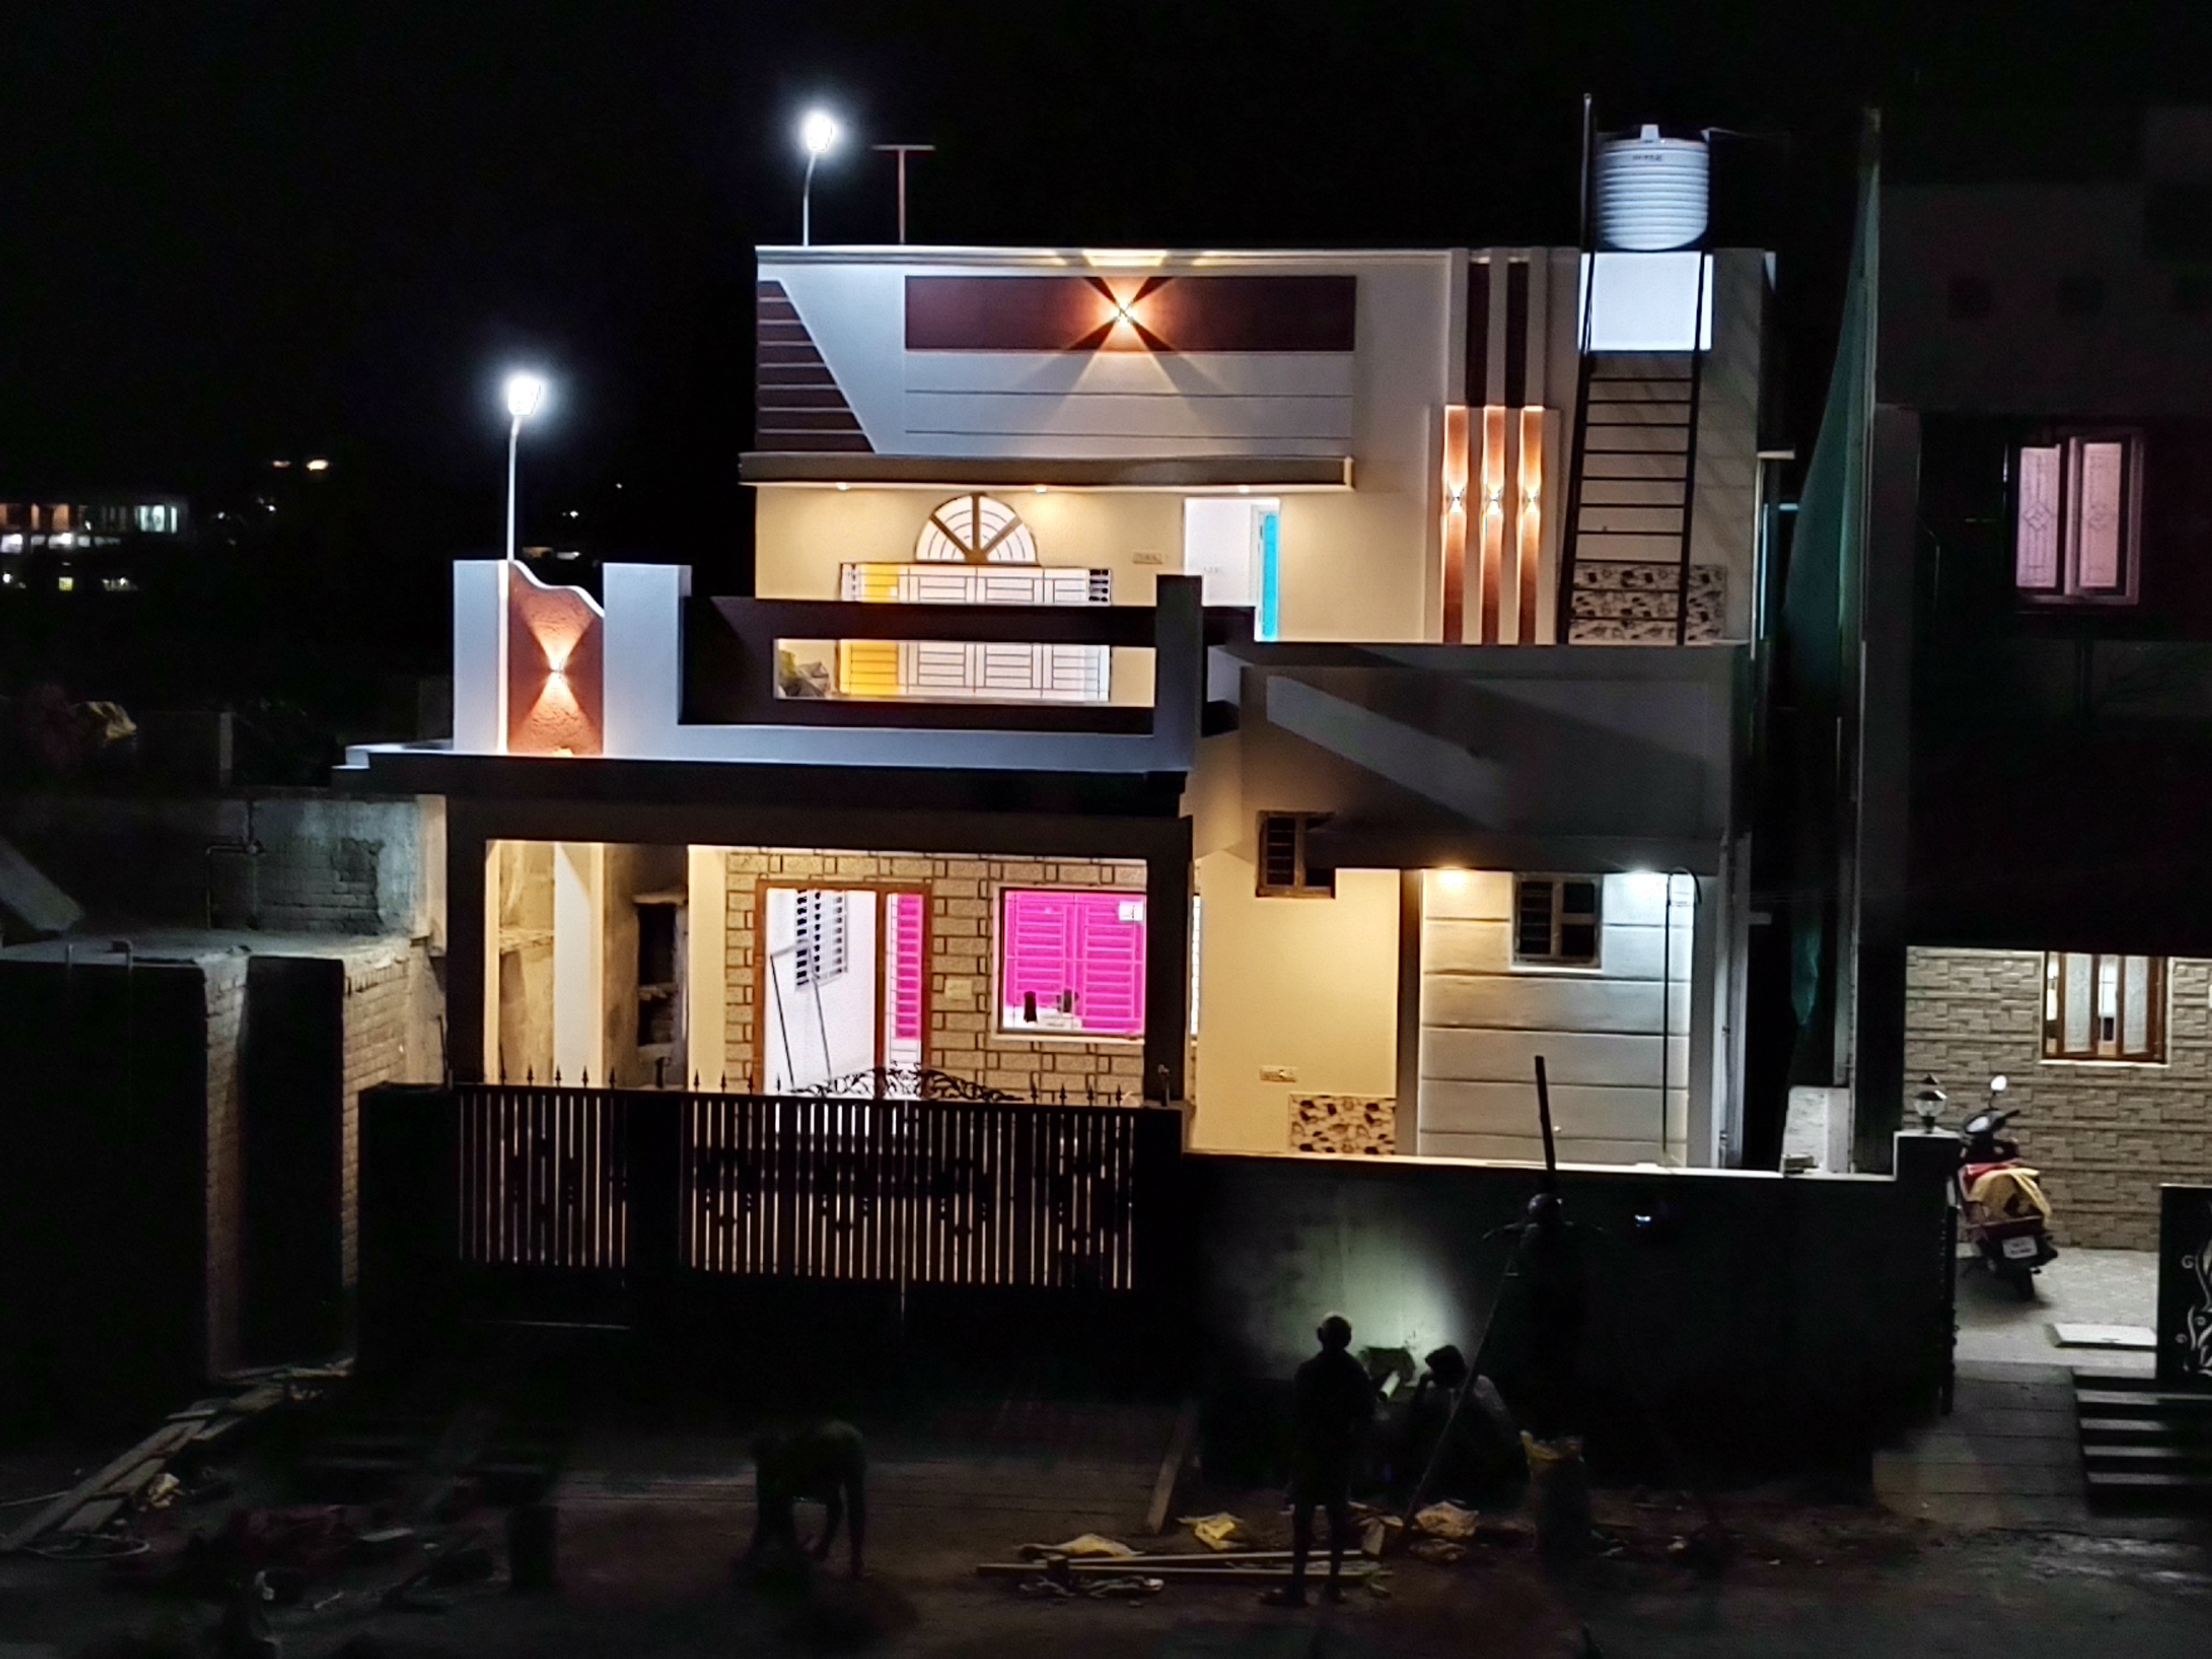 Independent House for Sale in Periyanaikan palayam